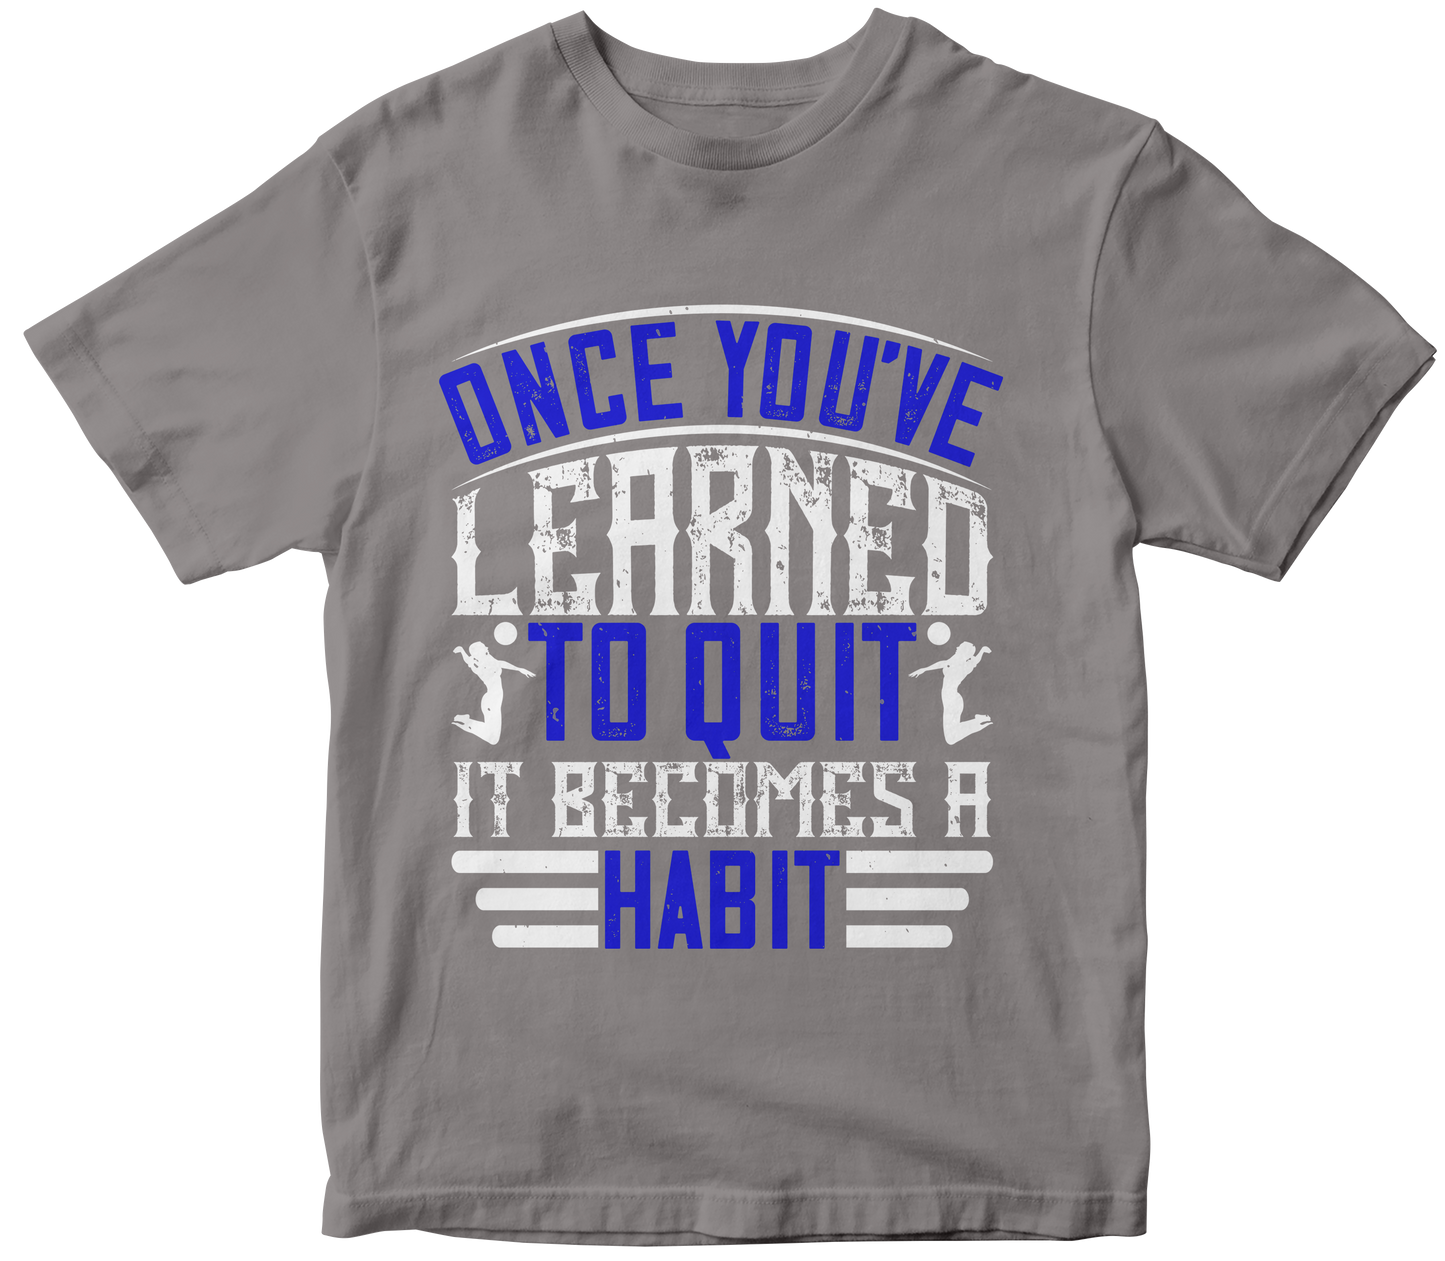 ONECE YOU'VE LEARNED TO QUIT IT BECAMES A HABIT